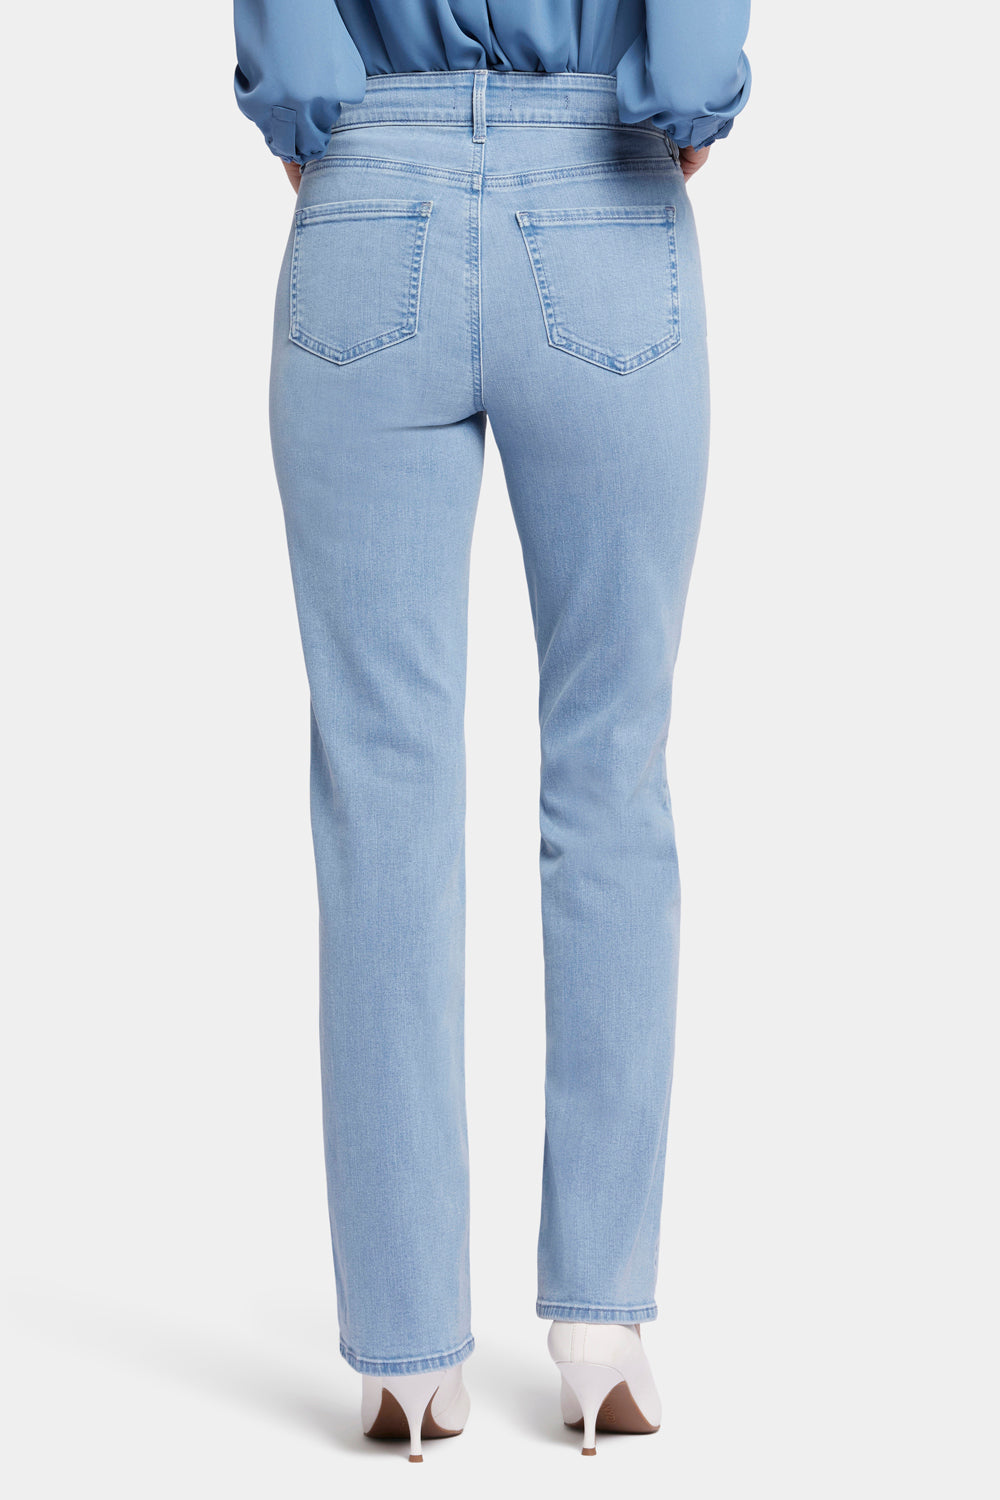 NYDJ Marilyn Straight Jeans In Petite With High Rise And 29